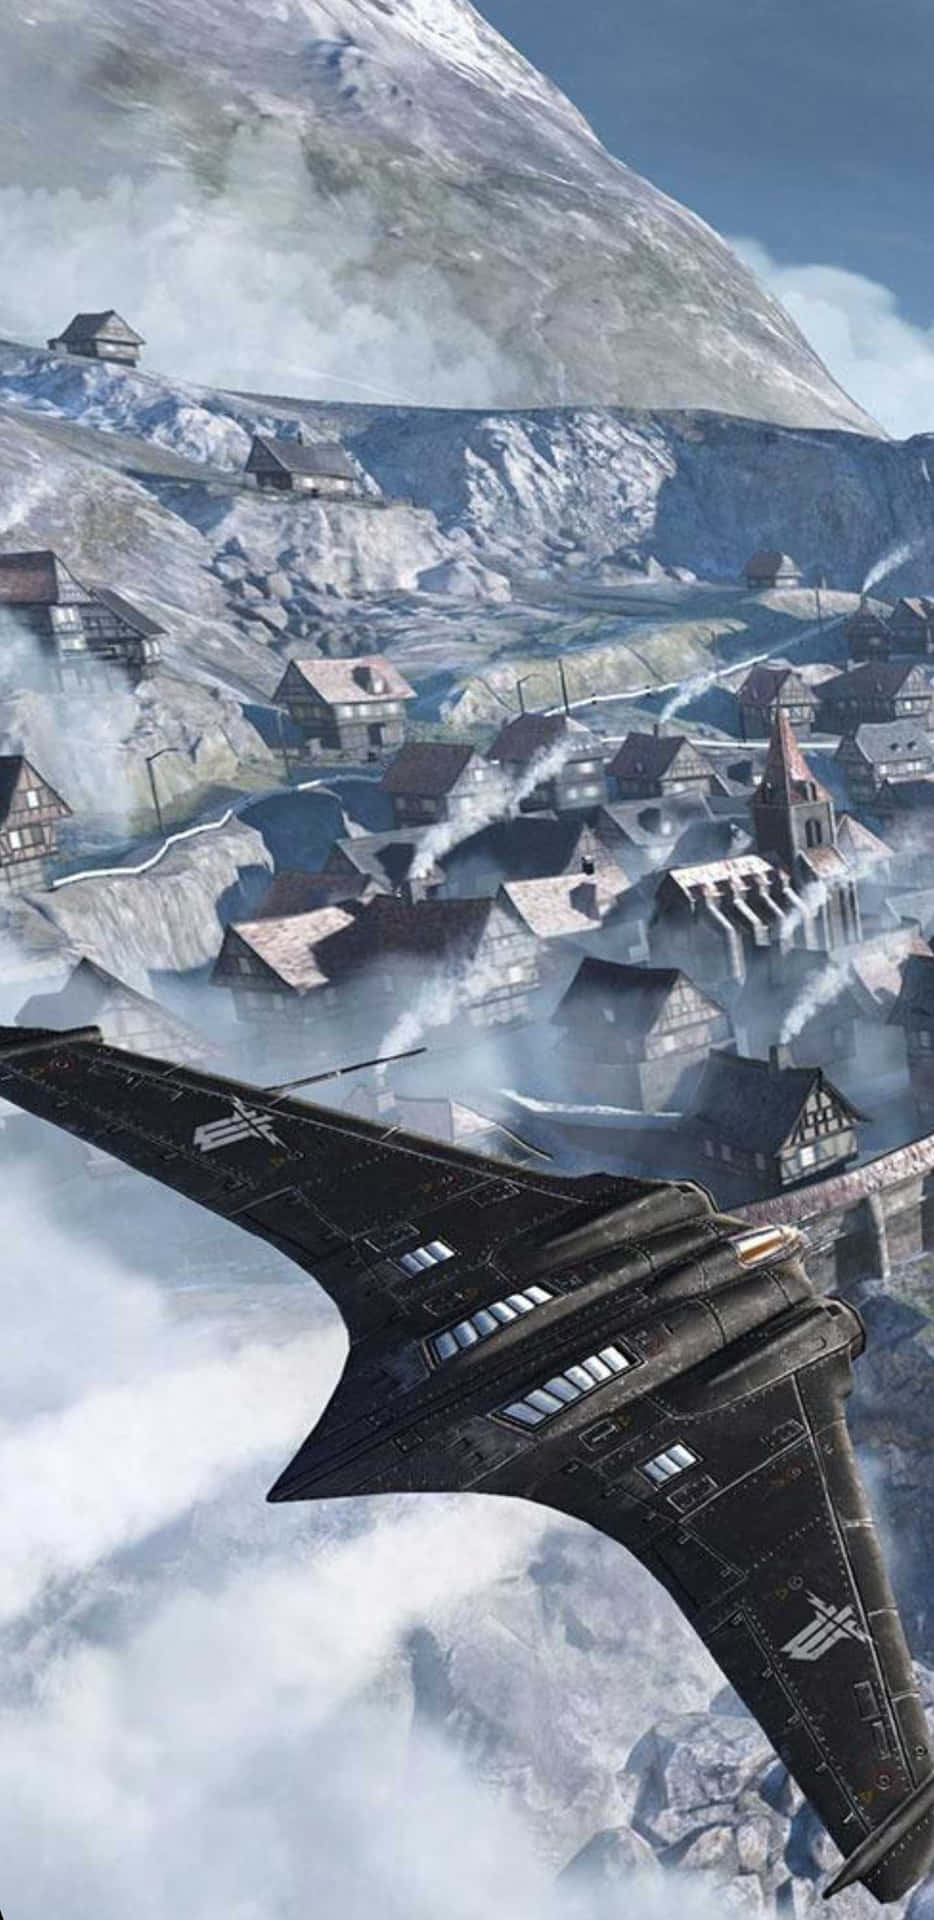 A Black Jet Flying Over A Snowy Town